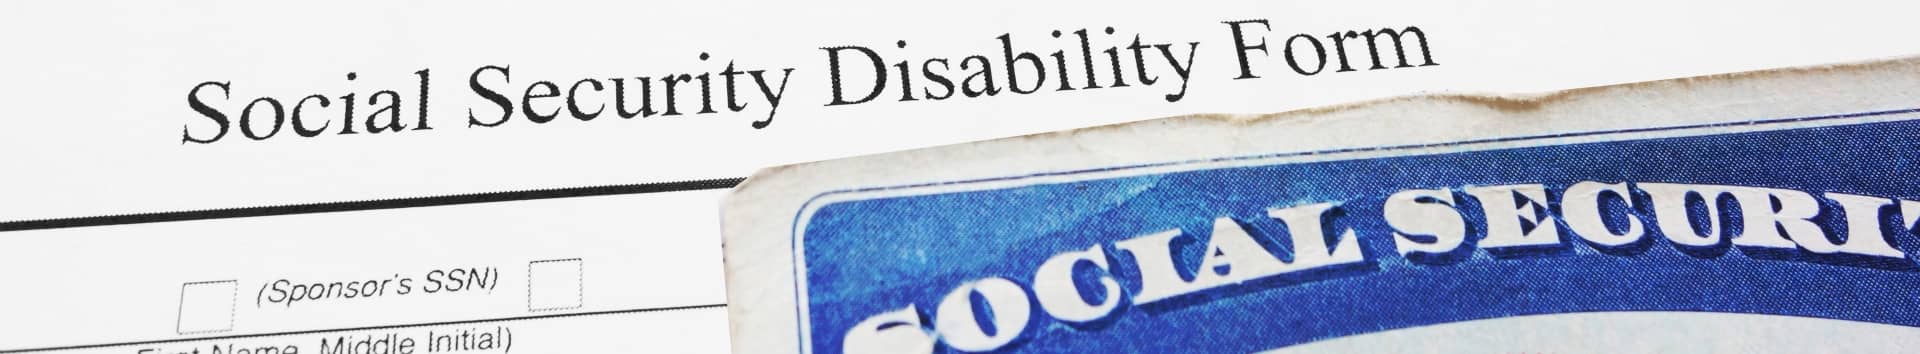 Social Security Card and Disability Form